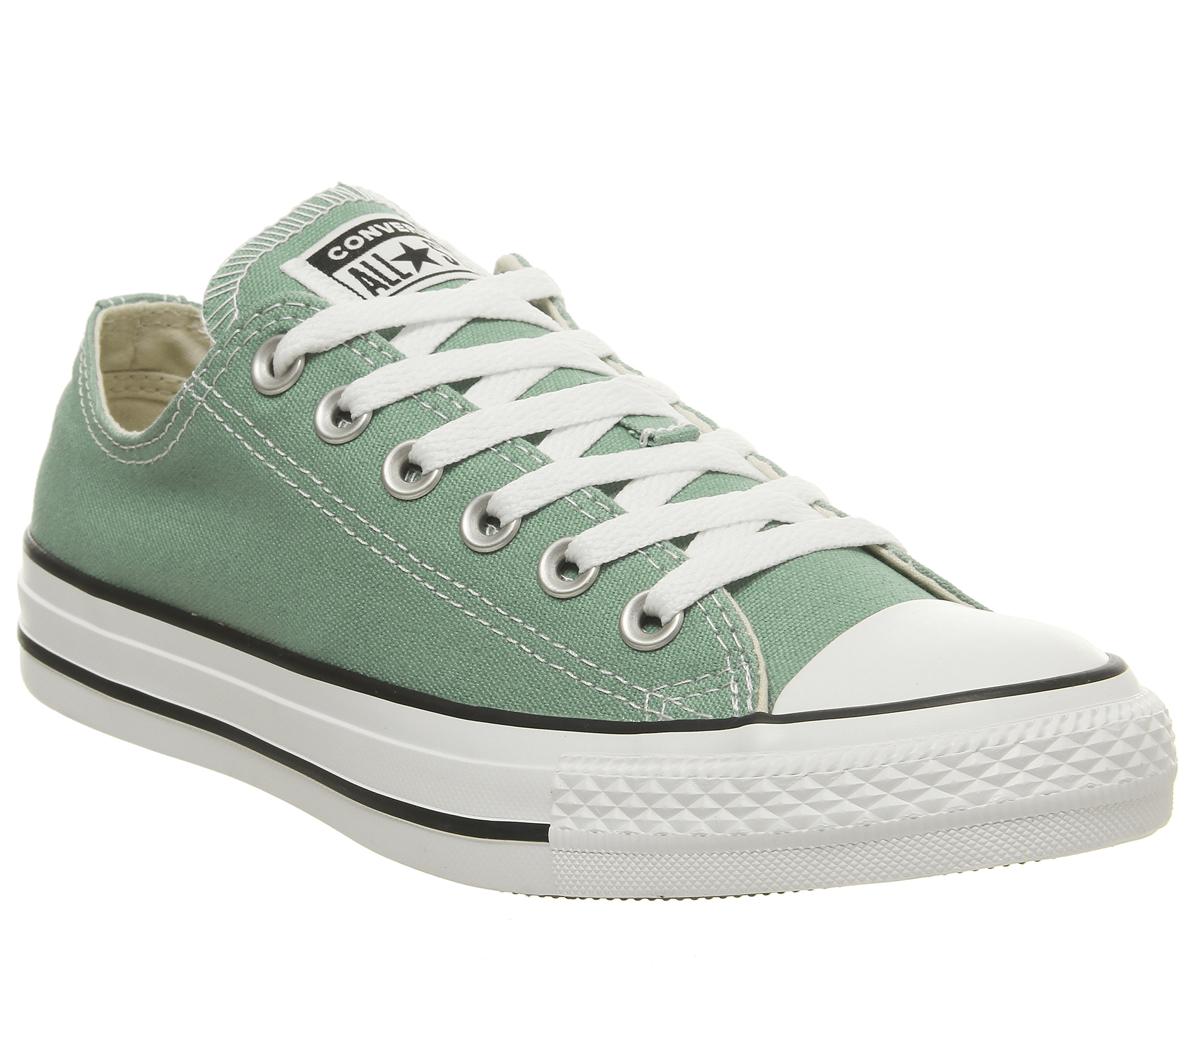 ConverseConverse All Star Low TrainersMineral Teal